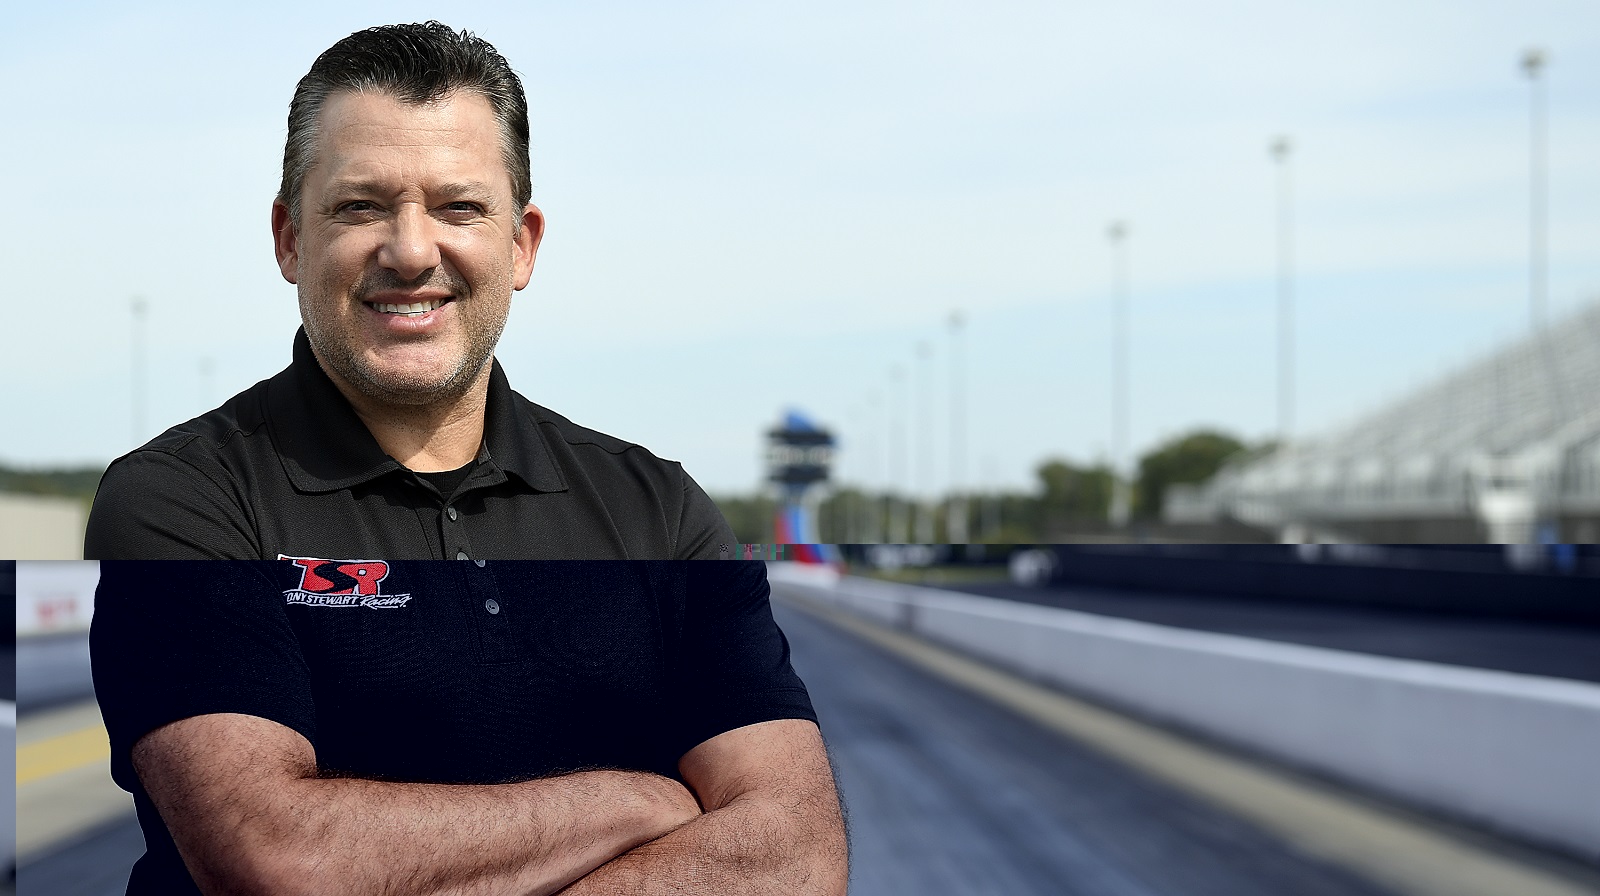 Tony Stewart poses for a portrait at the zMAX Dragway on Oct. 14, 2021, in Concord, North Carolina.